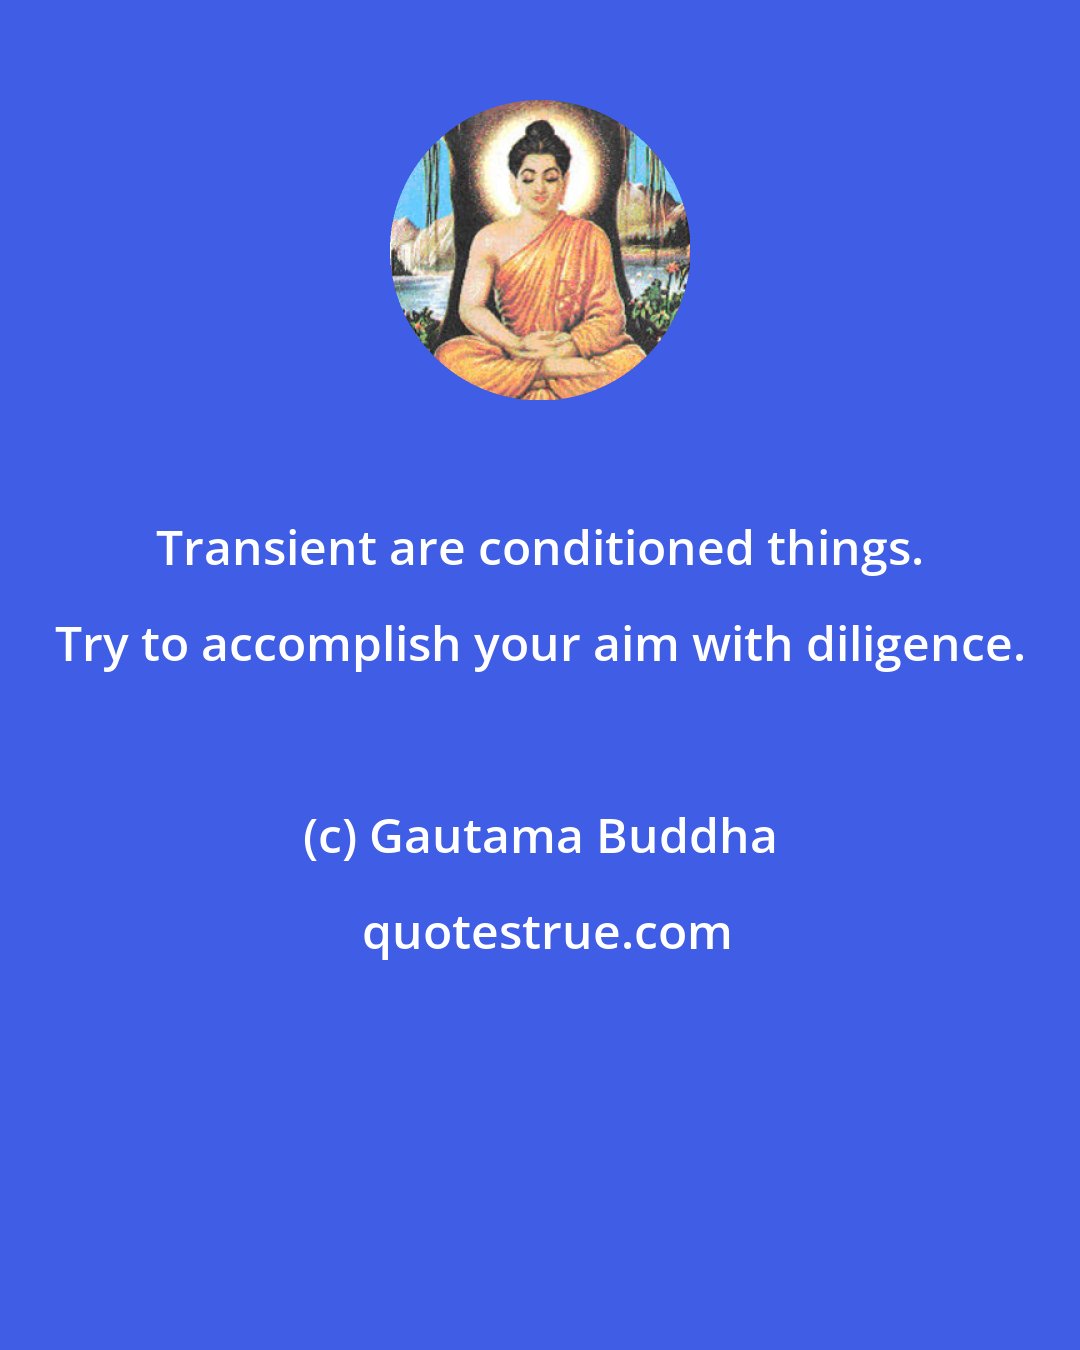 Gautama Buddha: Transient are conditioned things. Try to accomplish your aim with diligence.